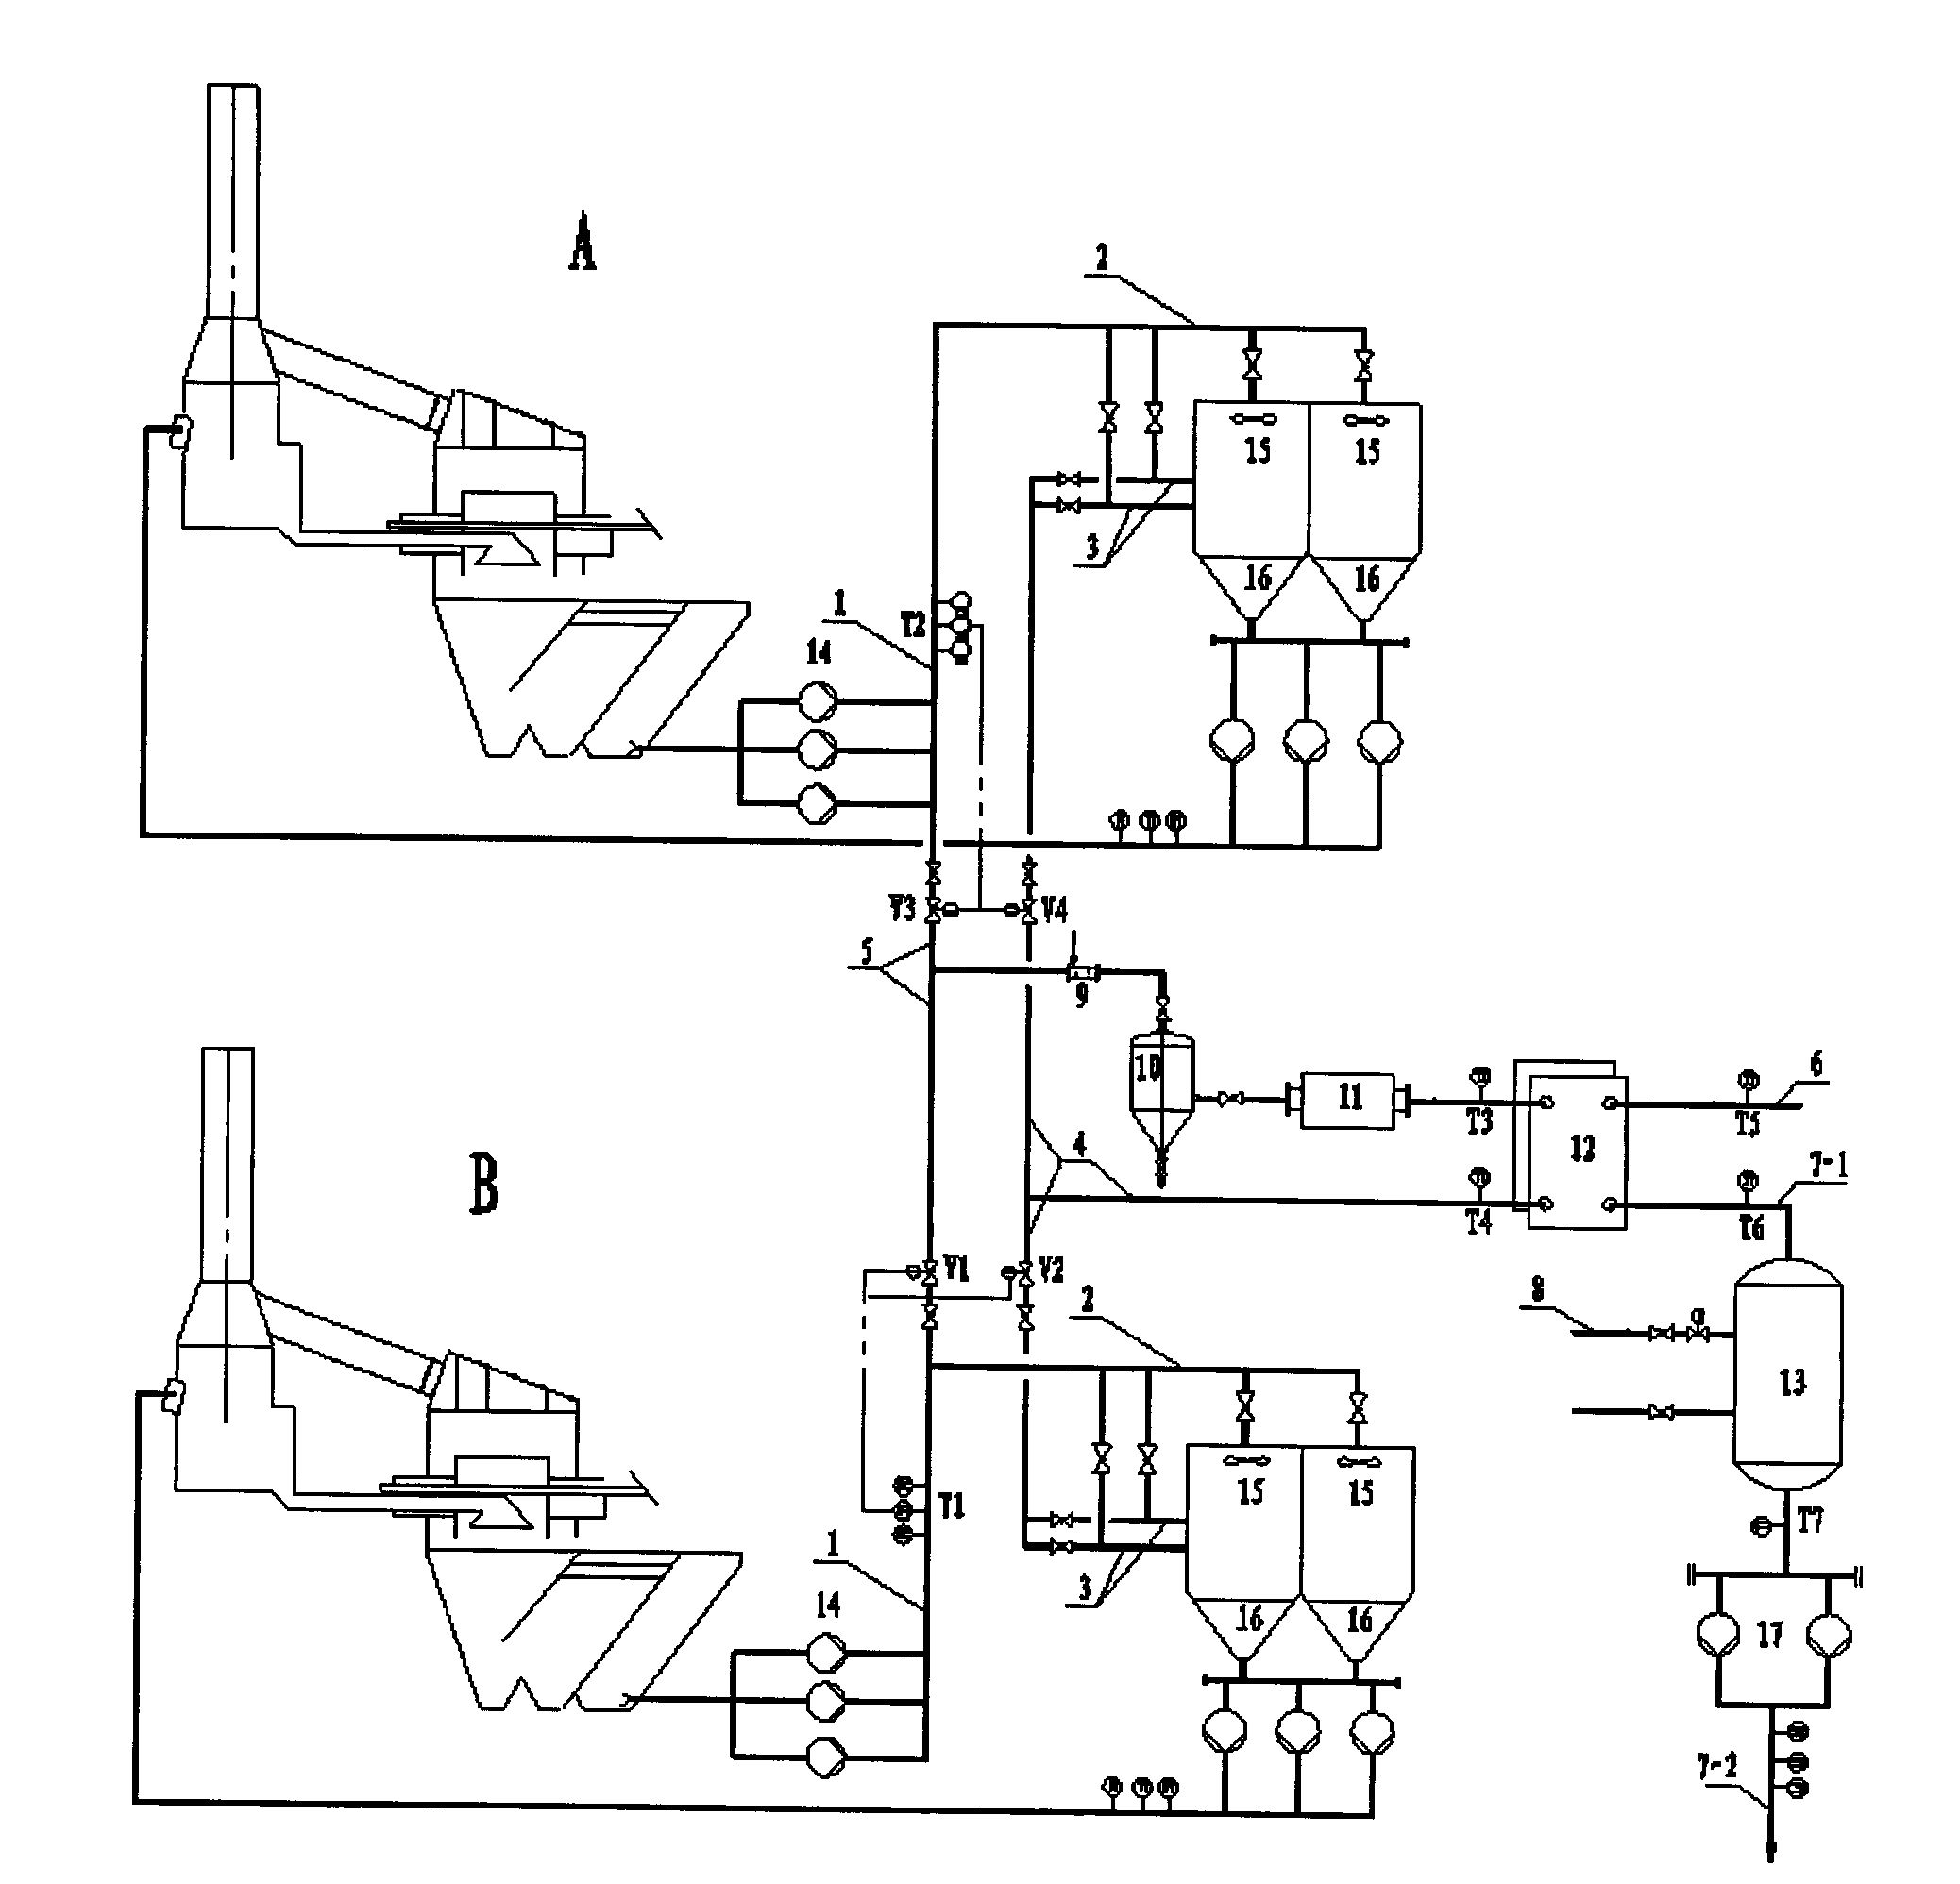 Processing system of heating by using waste heat of hot water for slag flushing in blast furnace